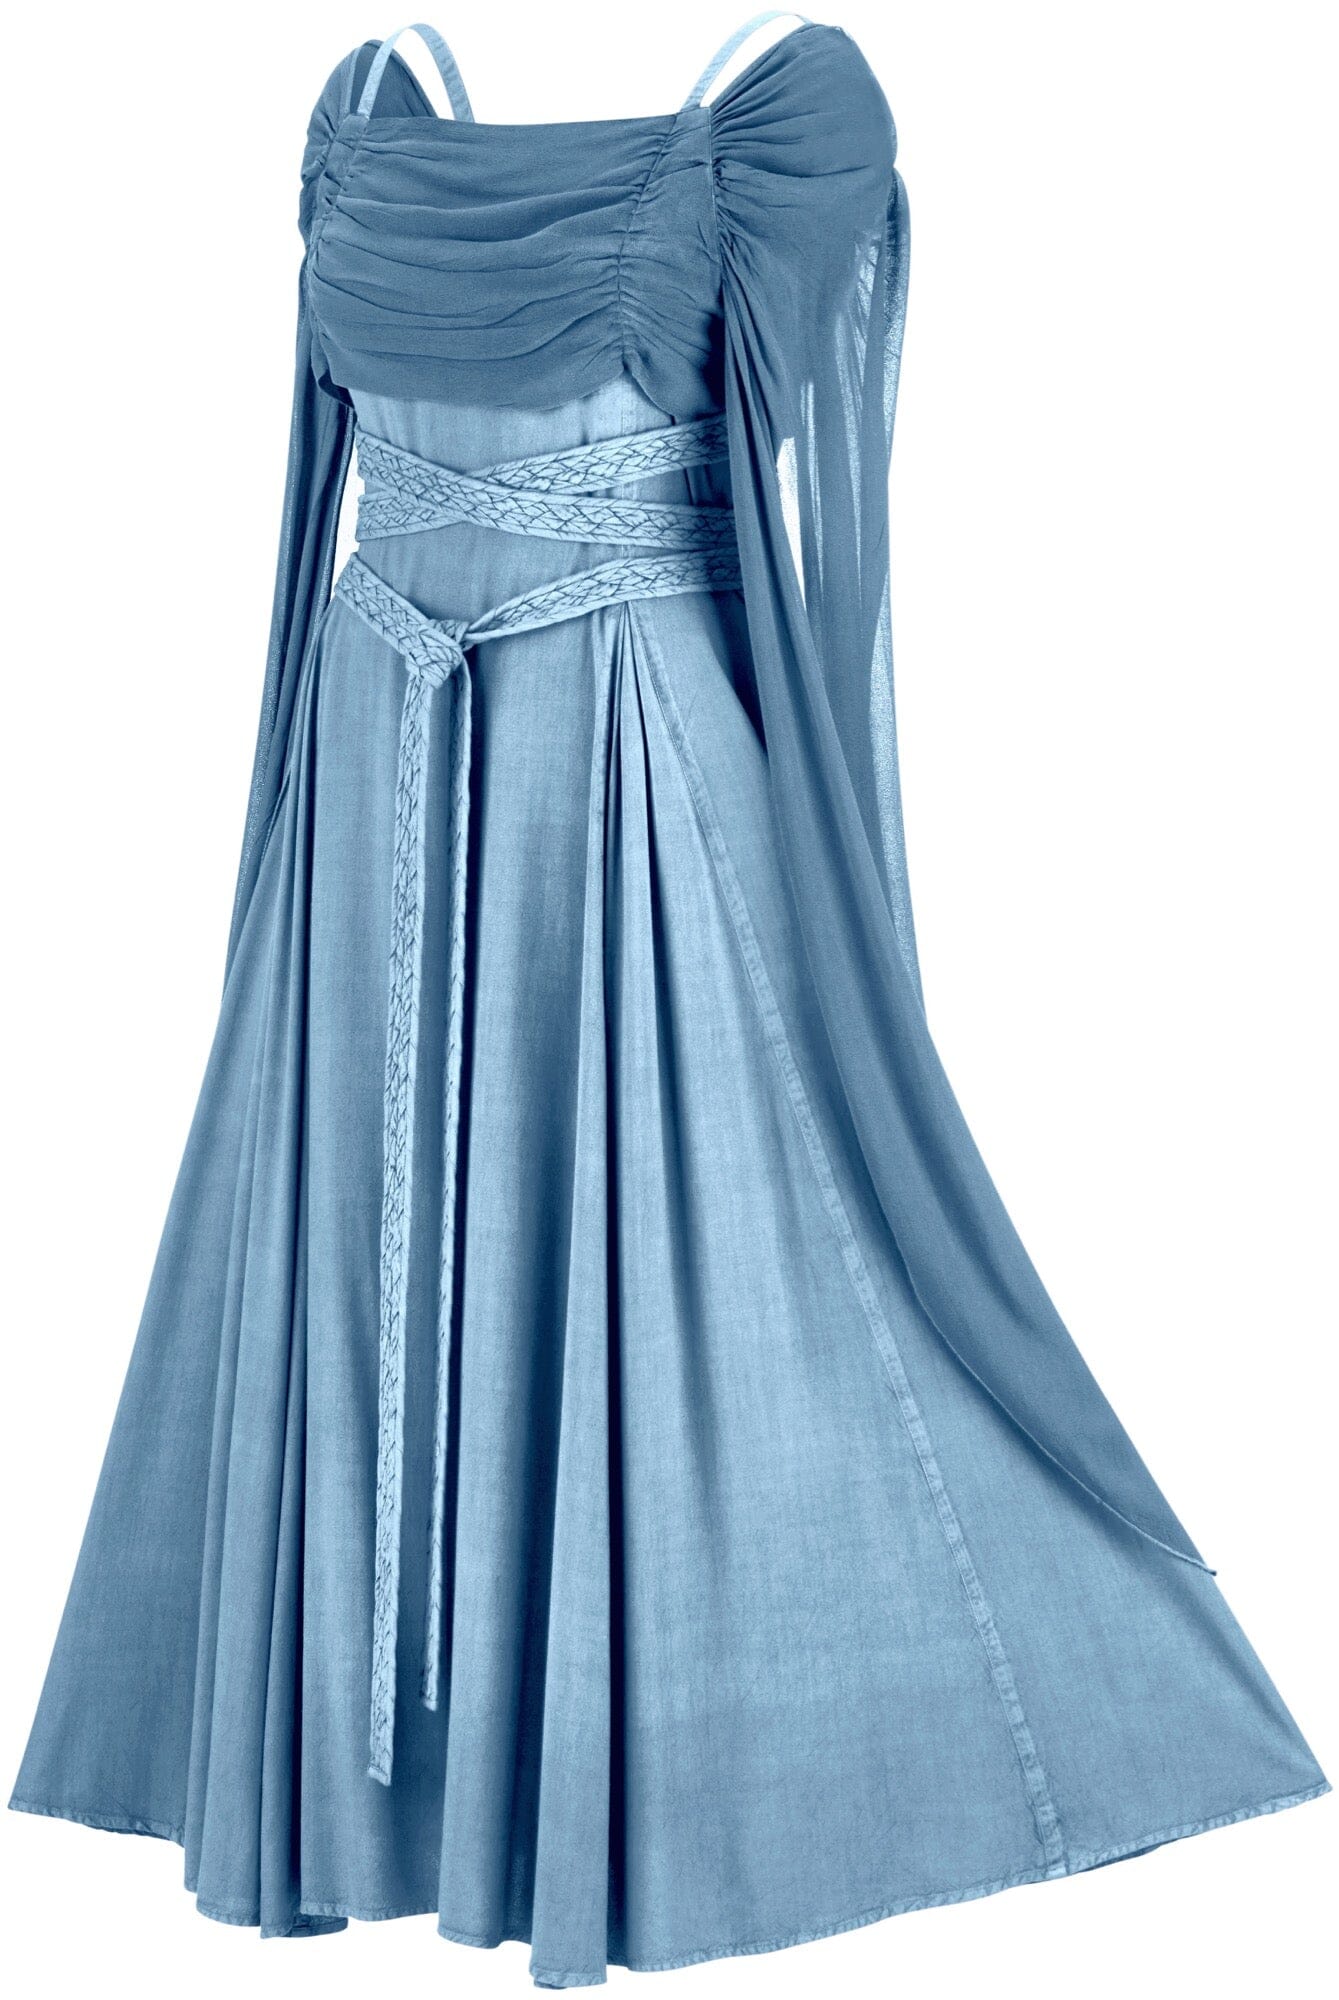 Demeter Maxi Limited Edition Colors - HolyClothing